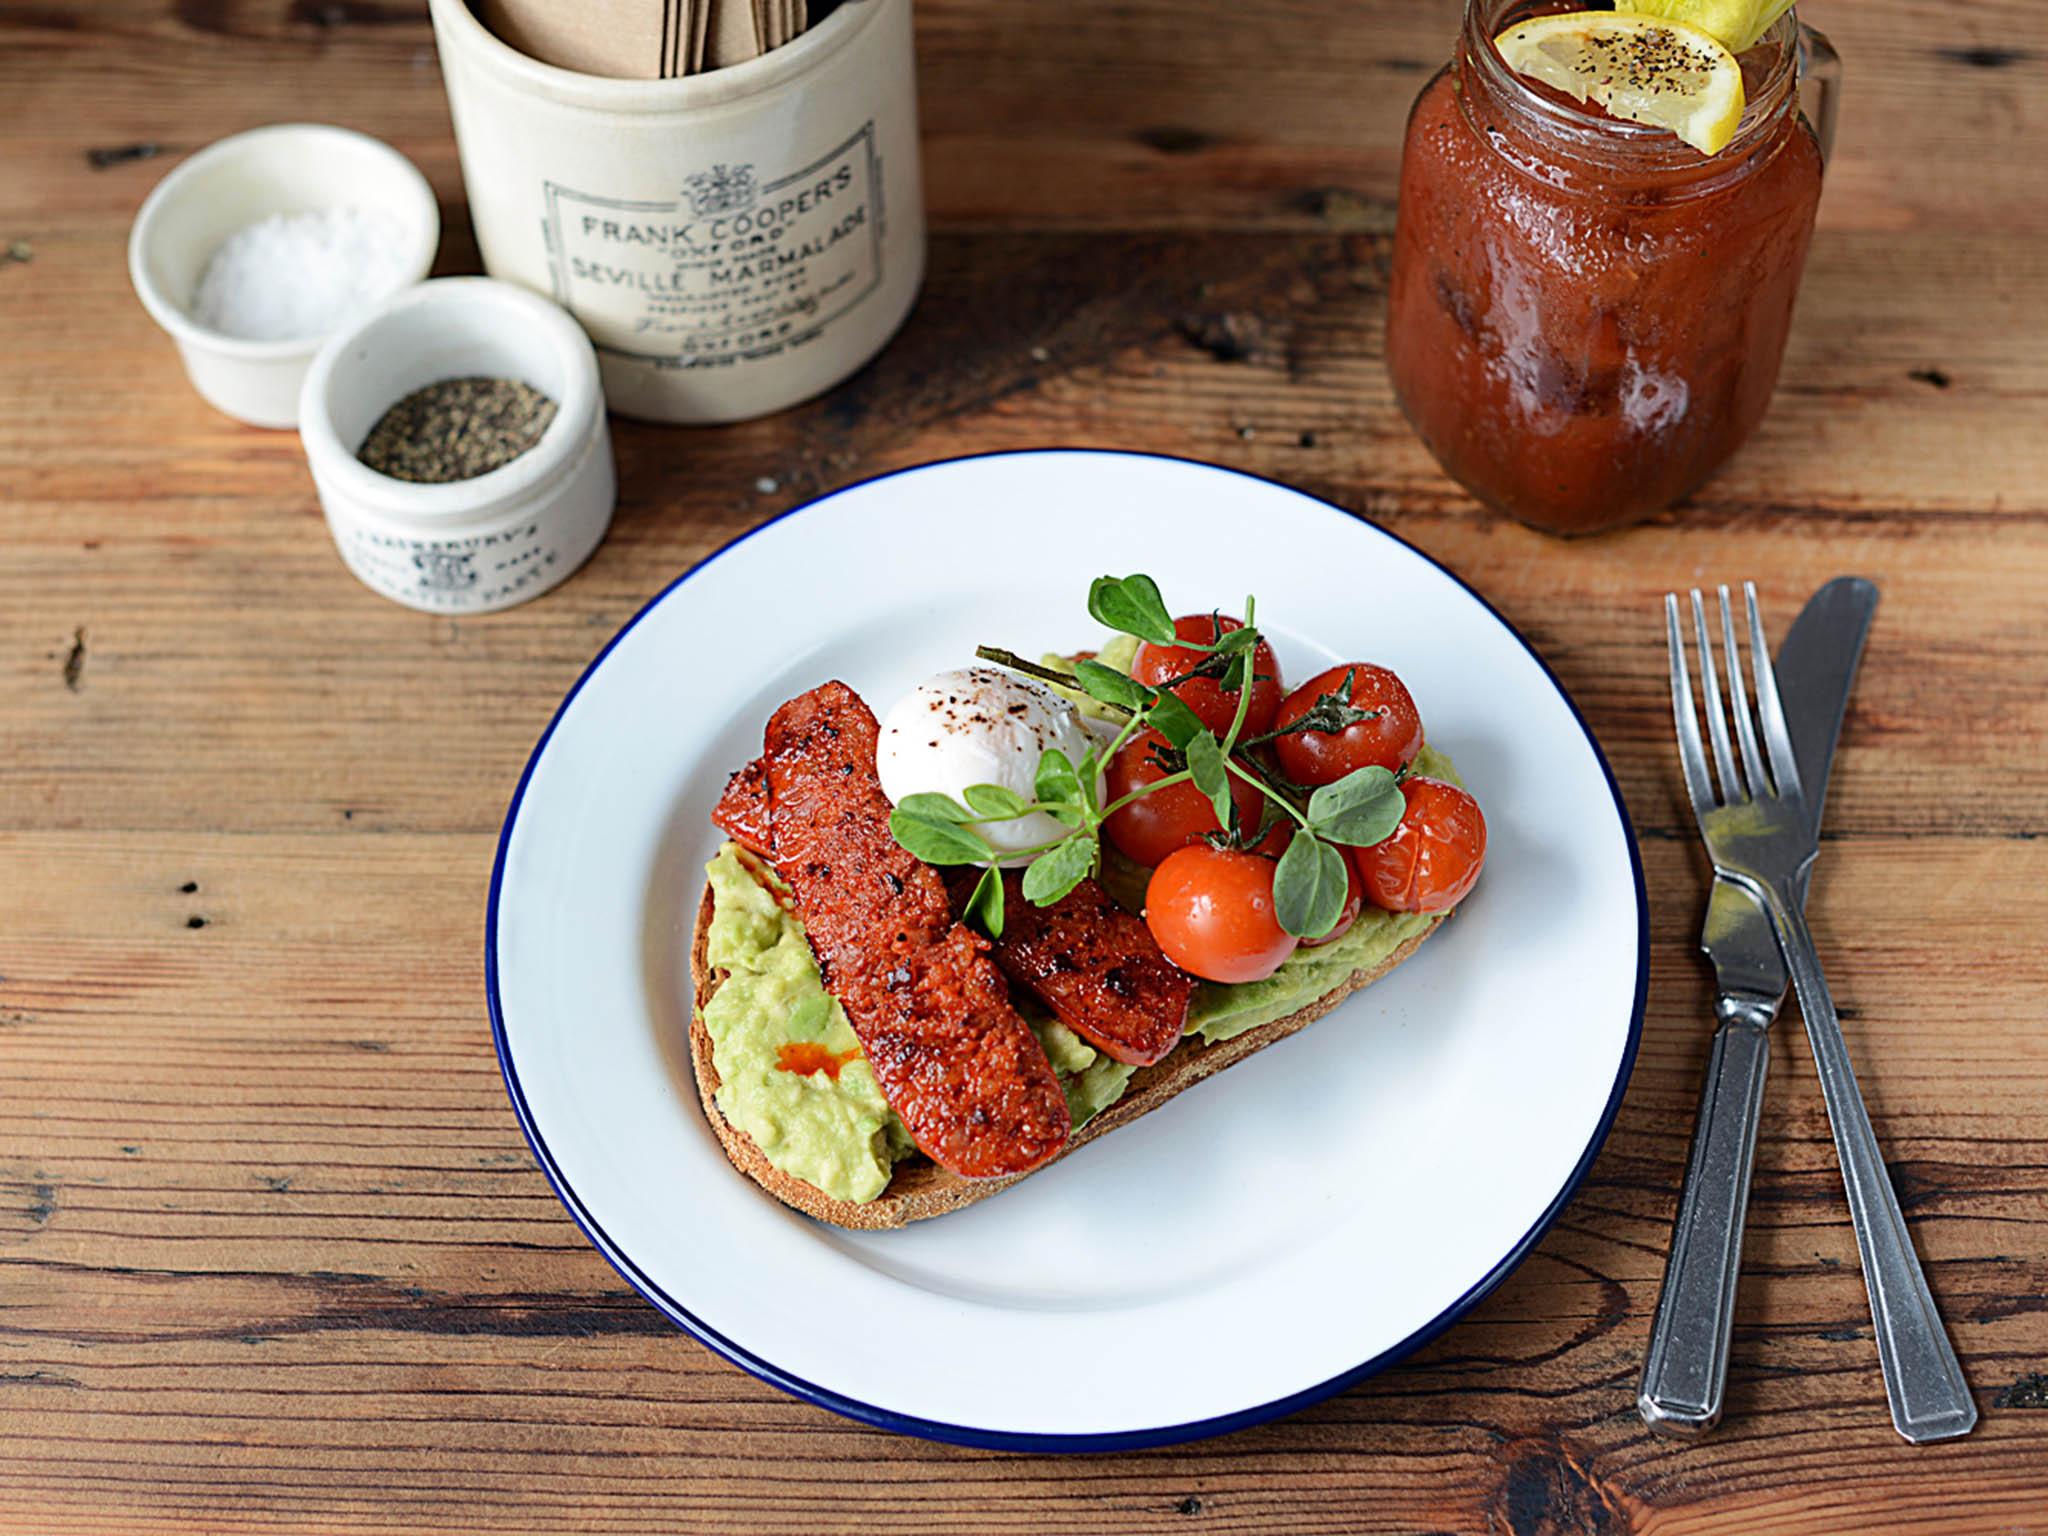 Smashed avocado on toast is another Ben's staple, £9.75